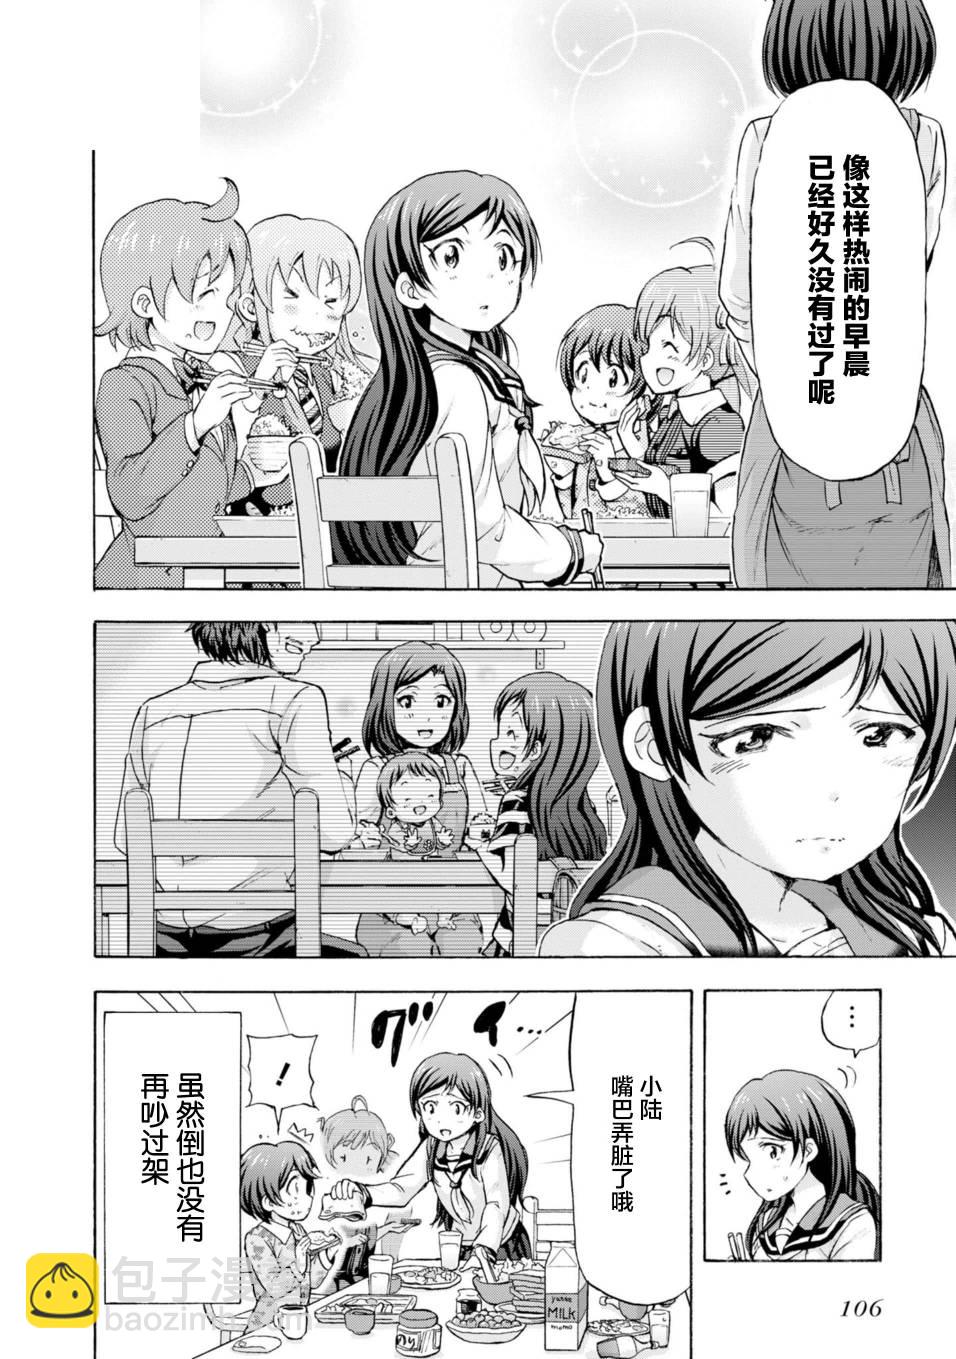 THE IDOLM@STER MILLION LIVE! Blooming Clover - 14話 - 4